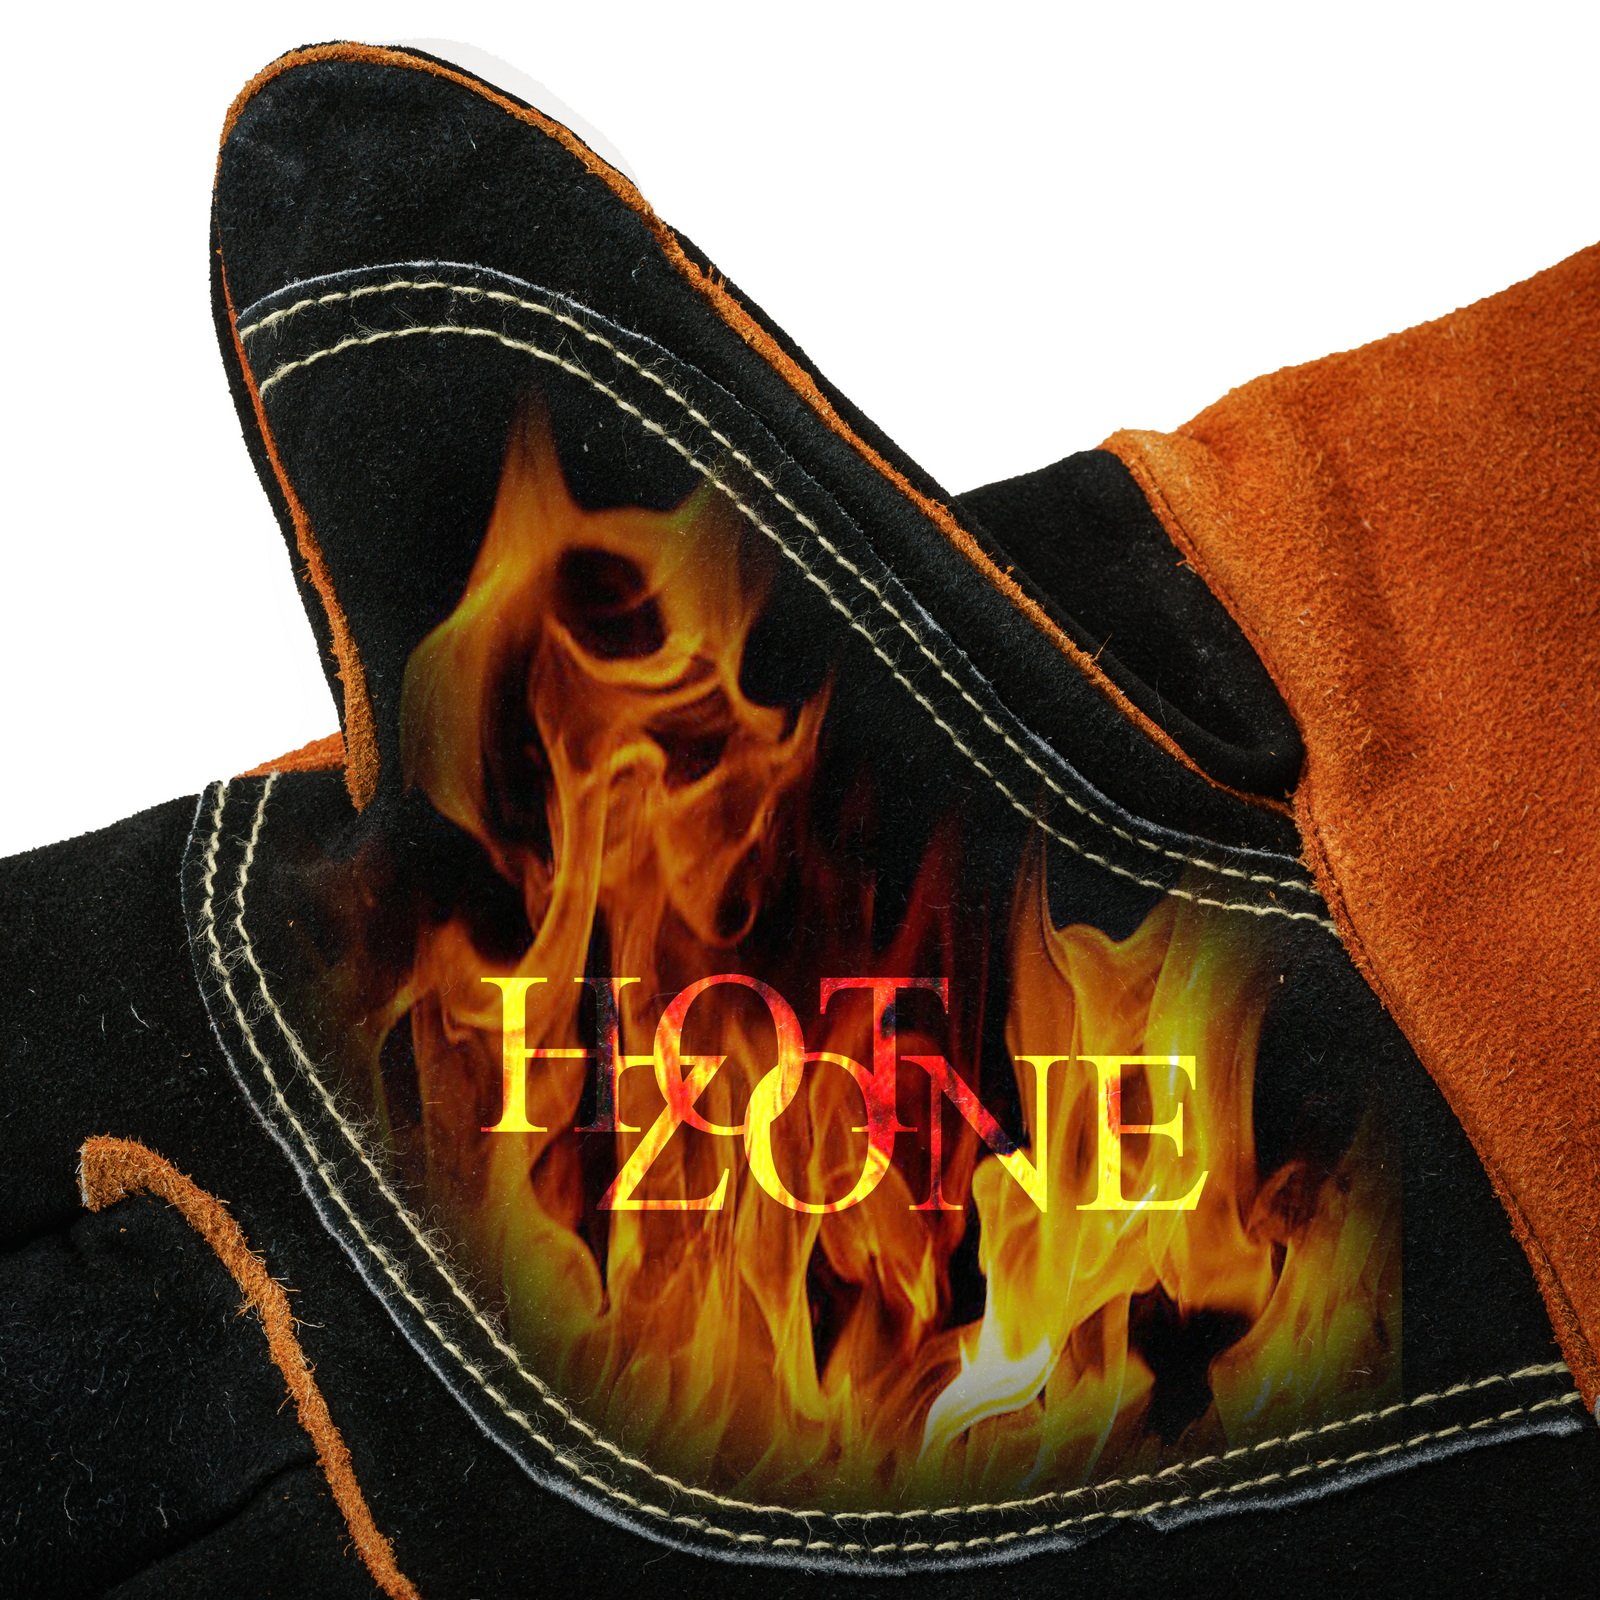 BLACK FOREST FOX Grillhandschuhe Pro 300 feuerfeste Aramid Grillhandschuhe, (Set), Ultra-Orange ultra orange